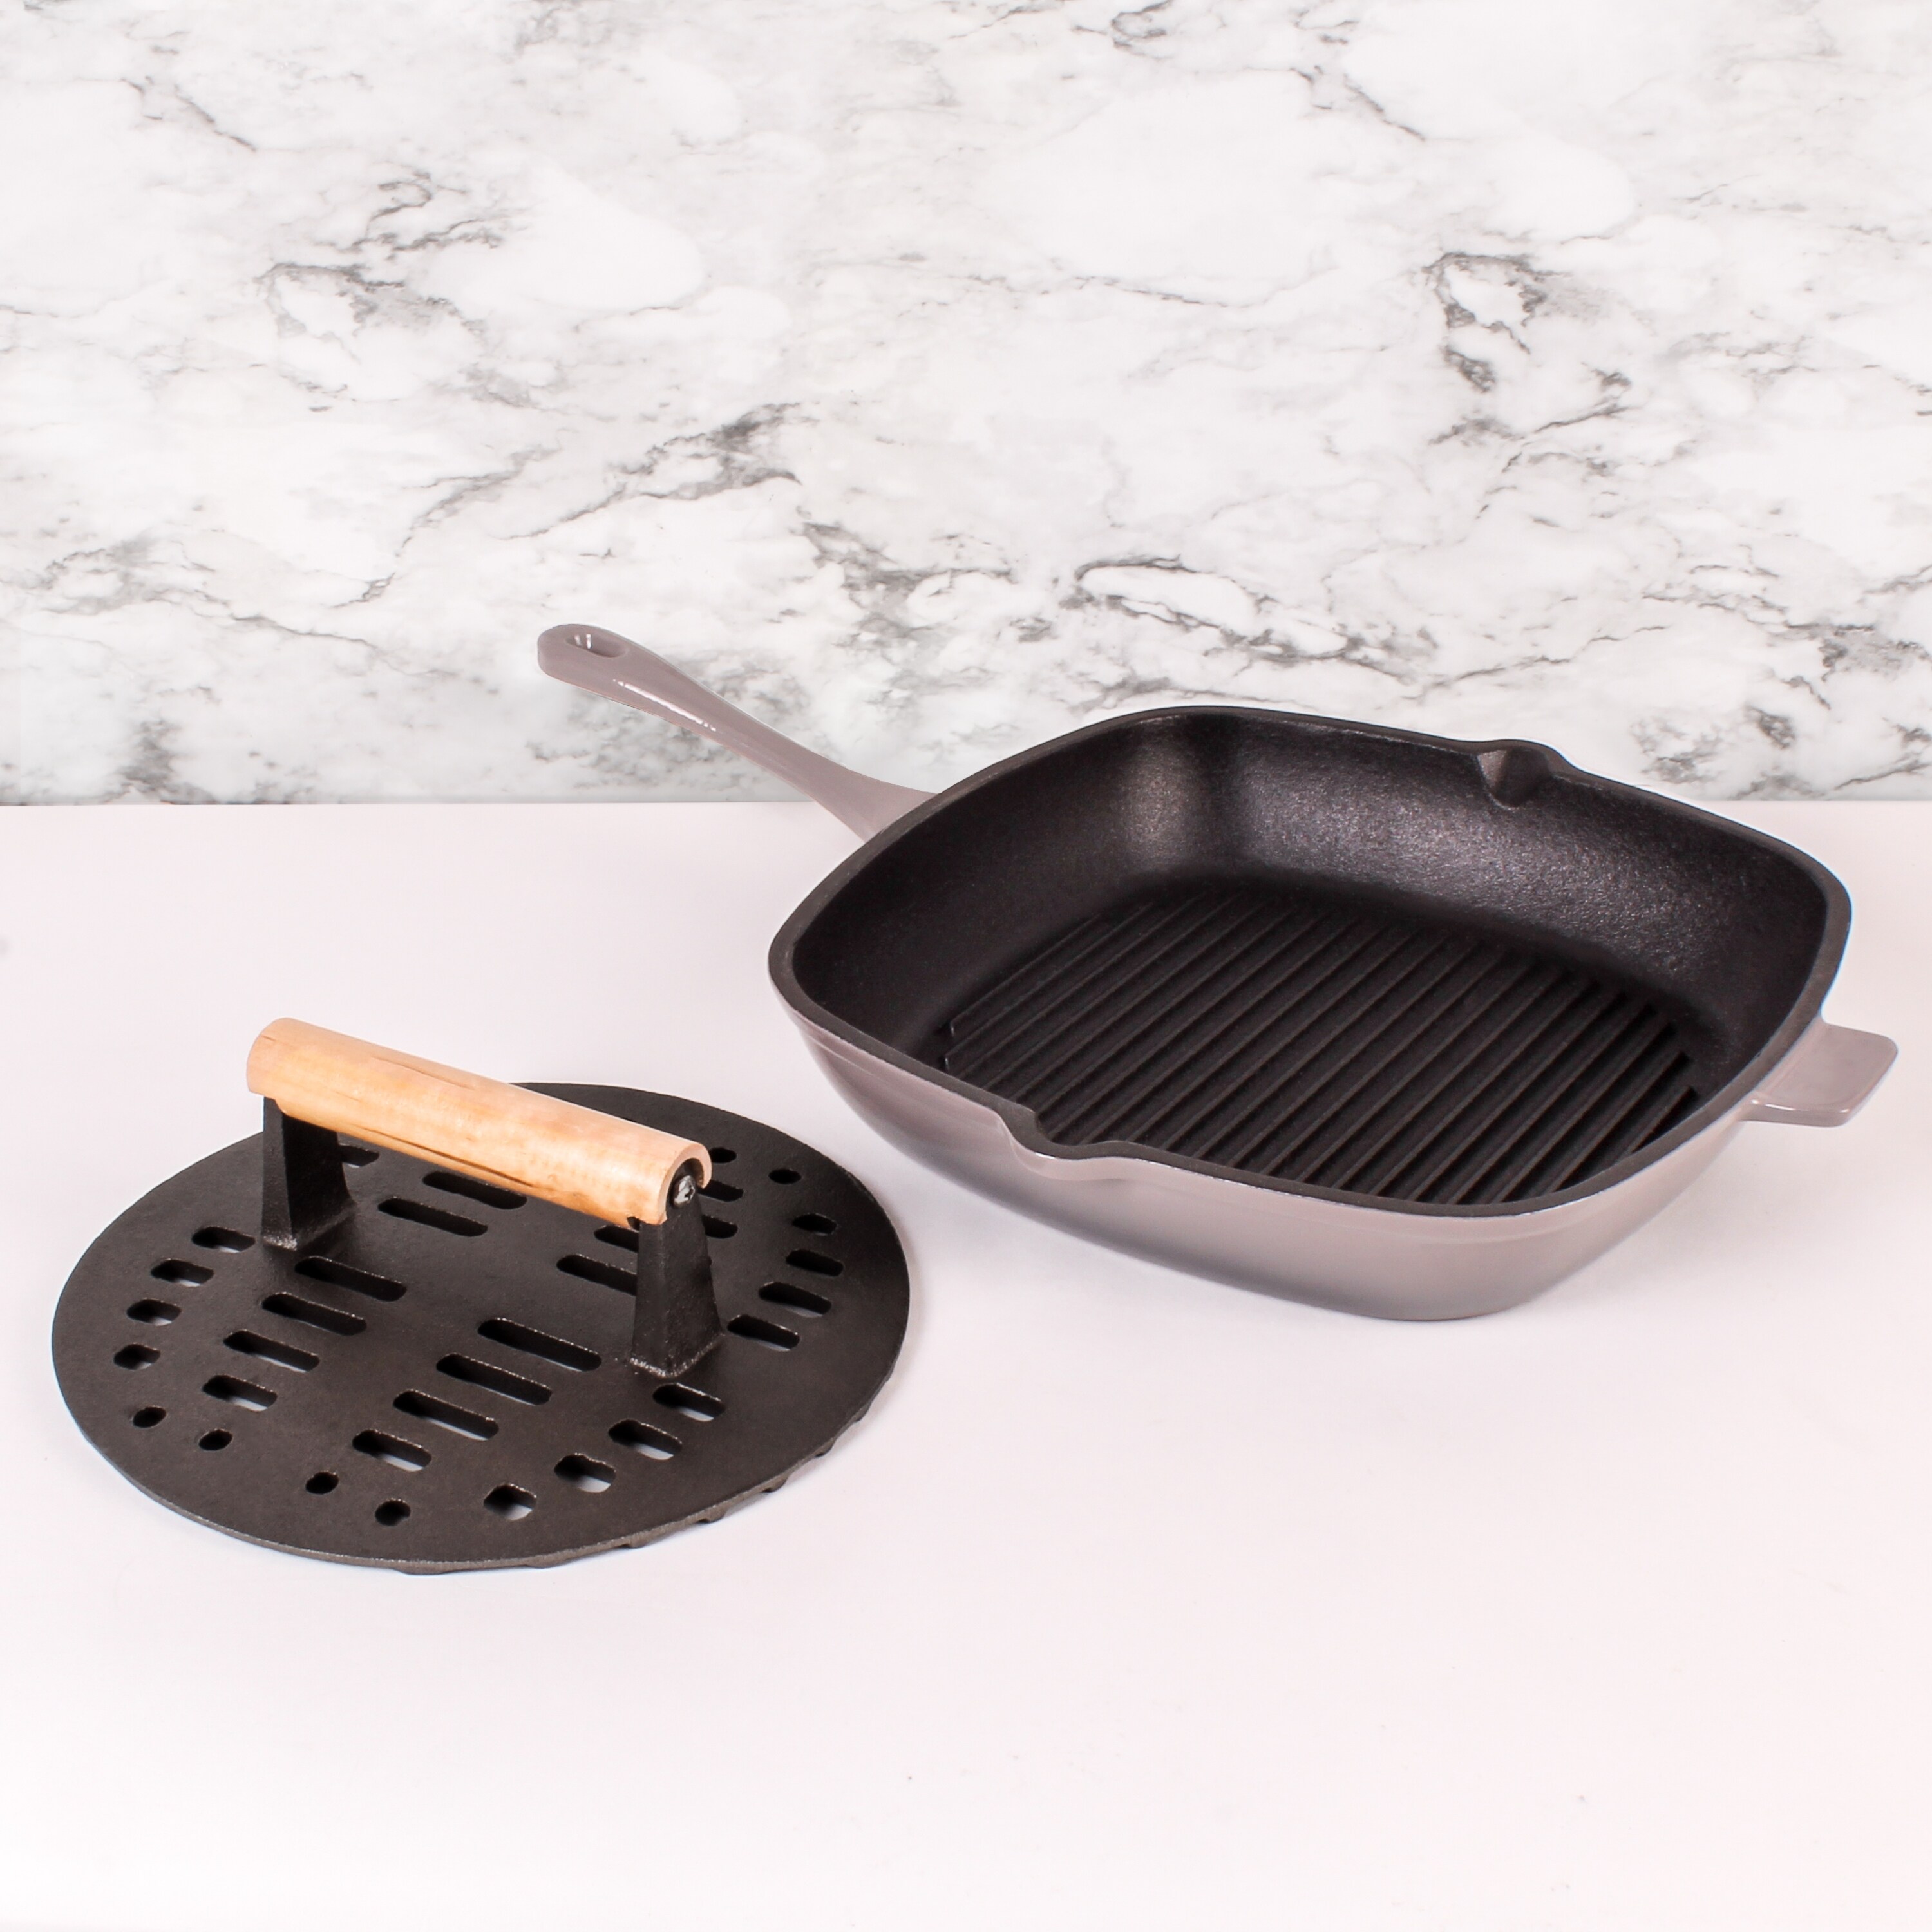 https://ak1.ostkcdn.com/images/products/is/images/direct/87a523cda1b2b62b388d2de7c02f88e5225c4826/Neo-2pc-Cast-Iron-Set-11%22-Grill-Pan-%26-with-Slotted-Steak-Press-Oyster.jpg